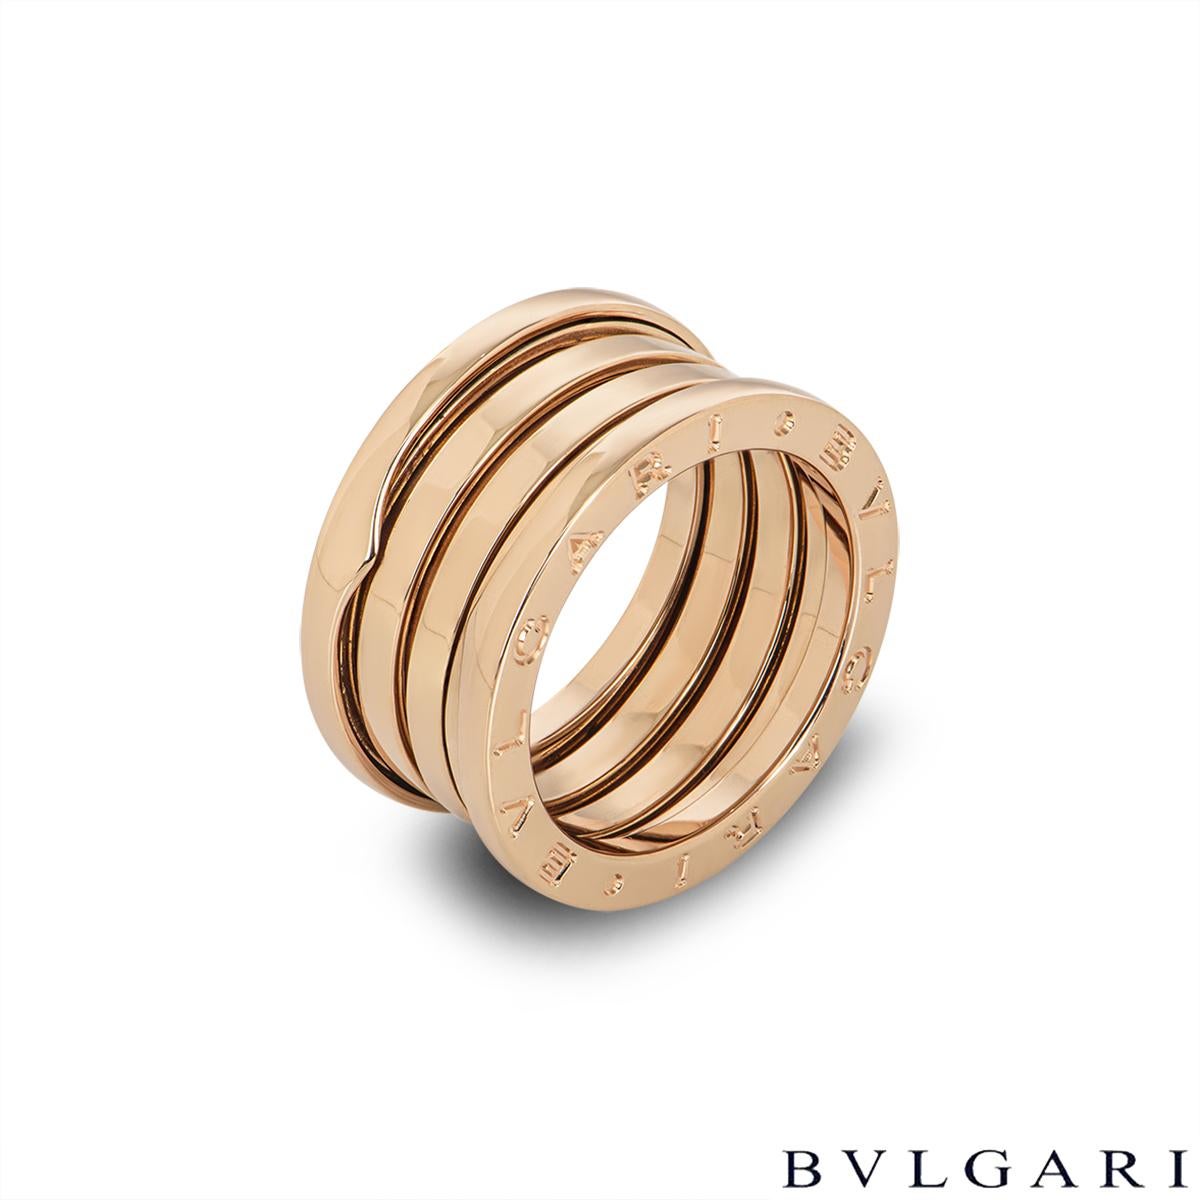 A classic 18k rose gold ring by Bvlgari from the B.Zero1 collection. The ring comprises of 3 spiral design bands with the iconic 'Bvlgari Bvlgari' logo engraved around the outer edges. The ring is a UK size O/ US size 7 and has a gross weight of